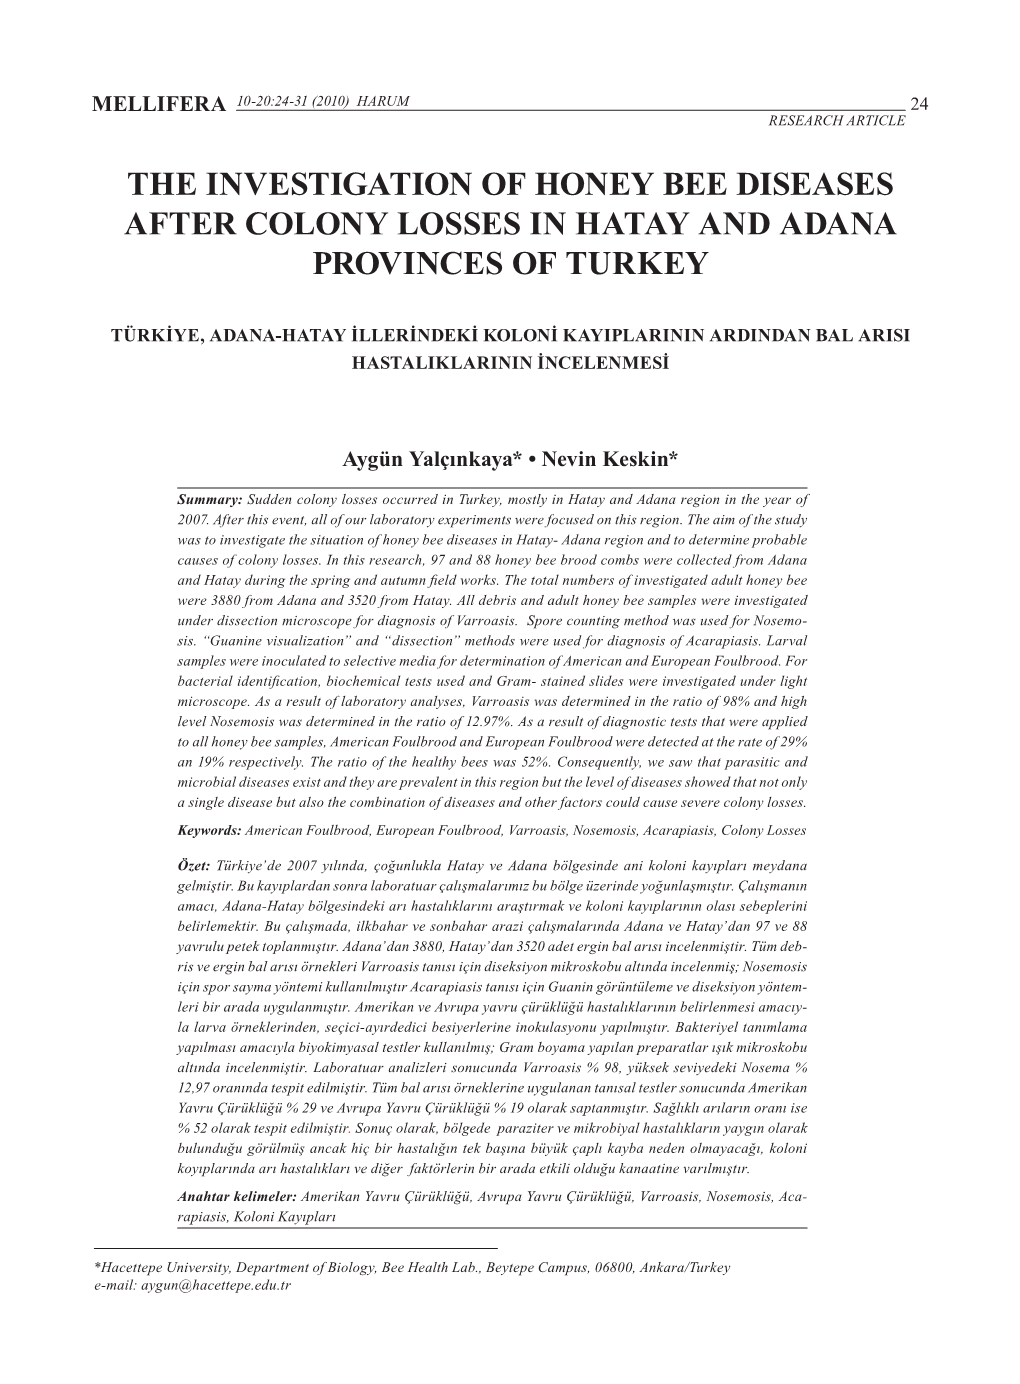 The Investigation of Honey Bee Diseases After Colony Losses in Hatay and Adana Provinces of Turkey